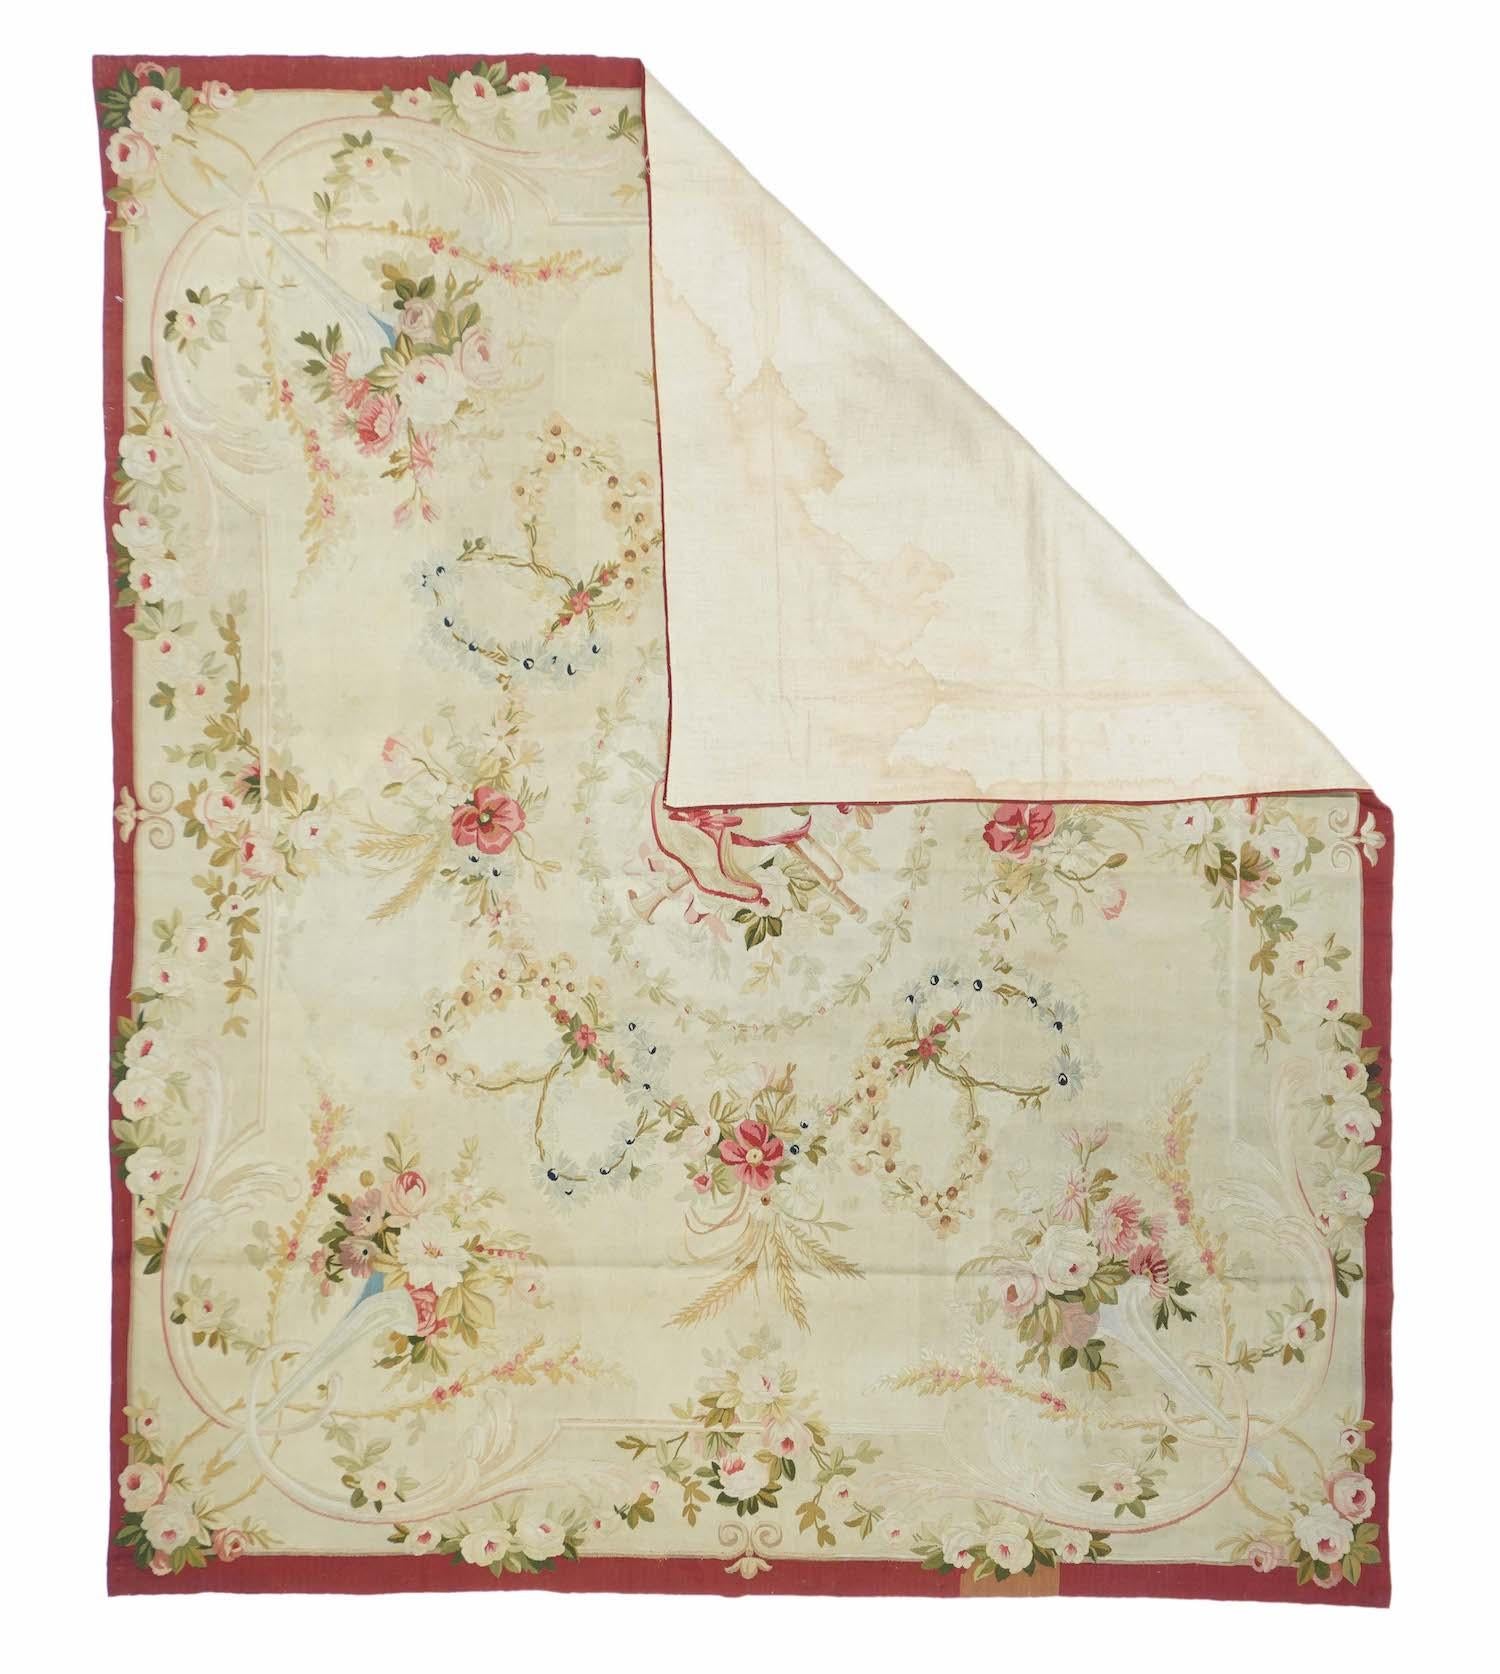 Aubusson is located to the southwest of Paris and has been weaving floor carpets and wall han gings, almost all in the tapestry, pileless technique, since the mioddle of the 18th century. Measures: 5'1'' x 6'2''.
This flatwoven rug or wall hanging